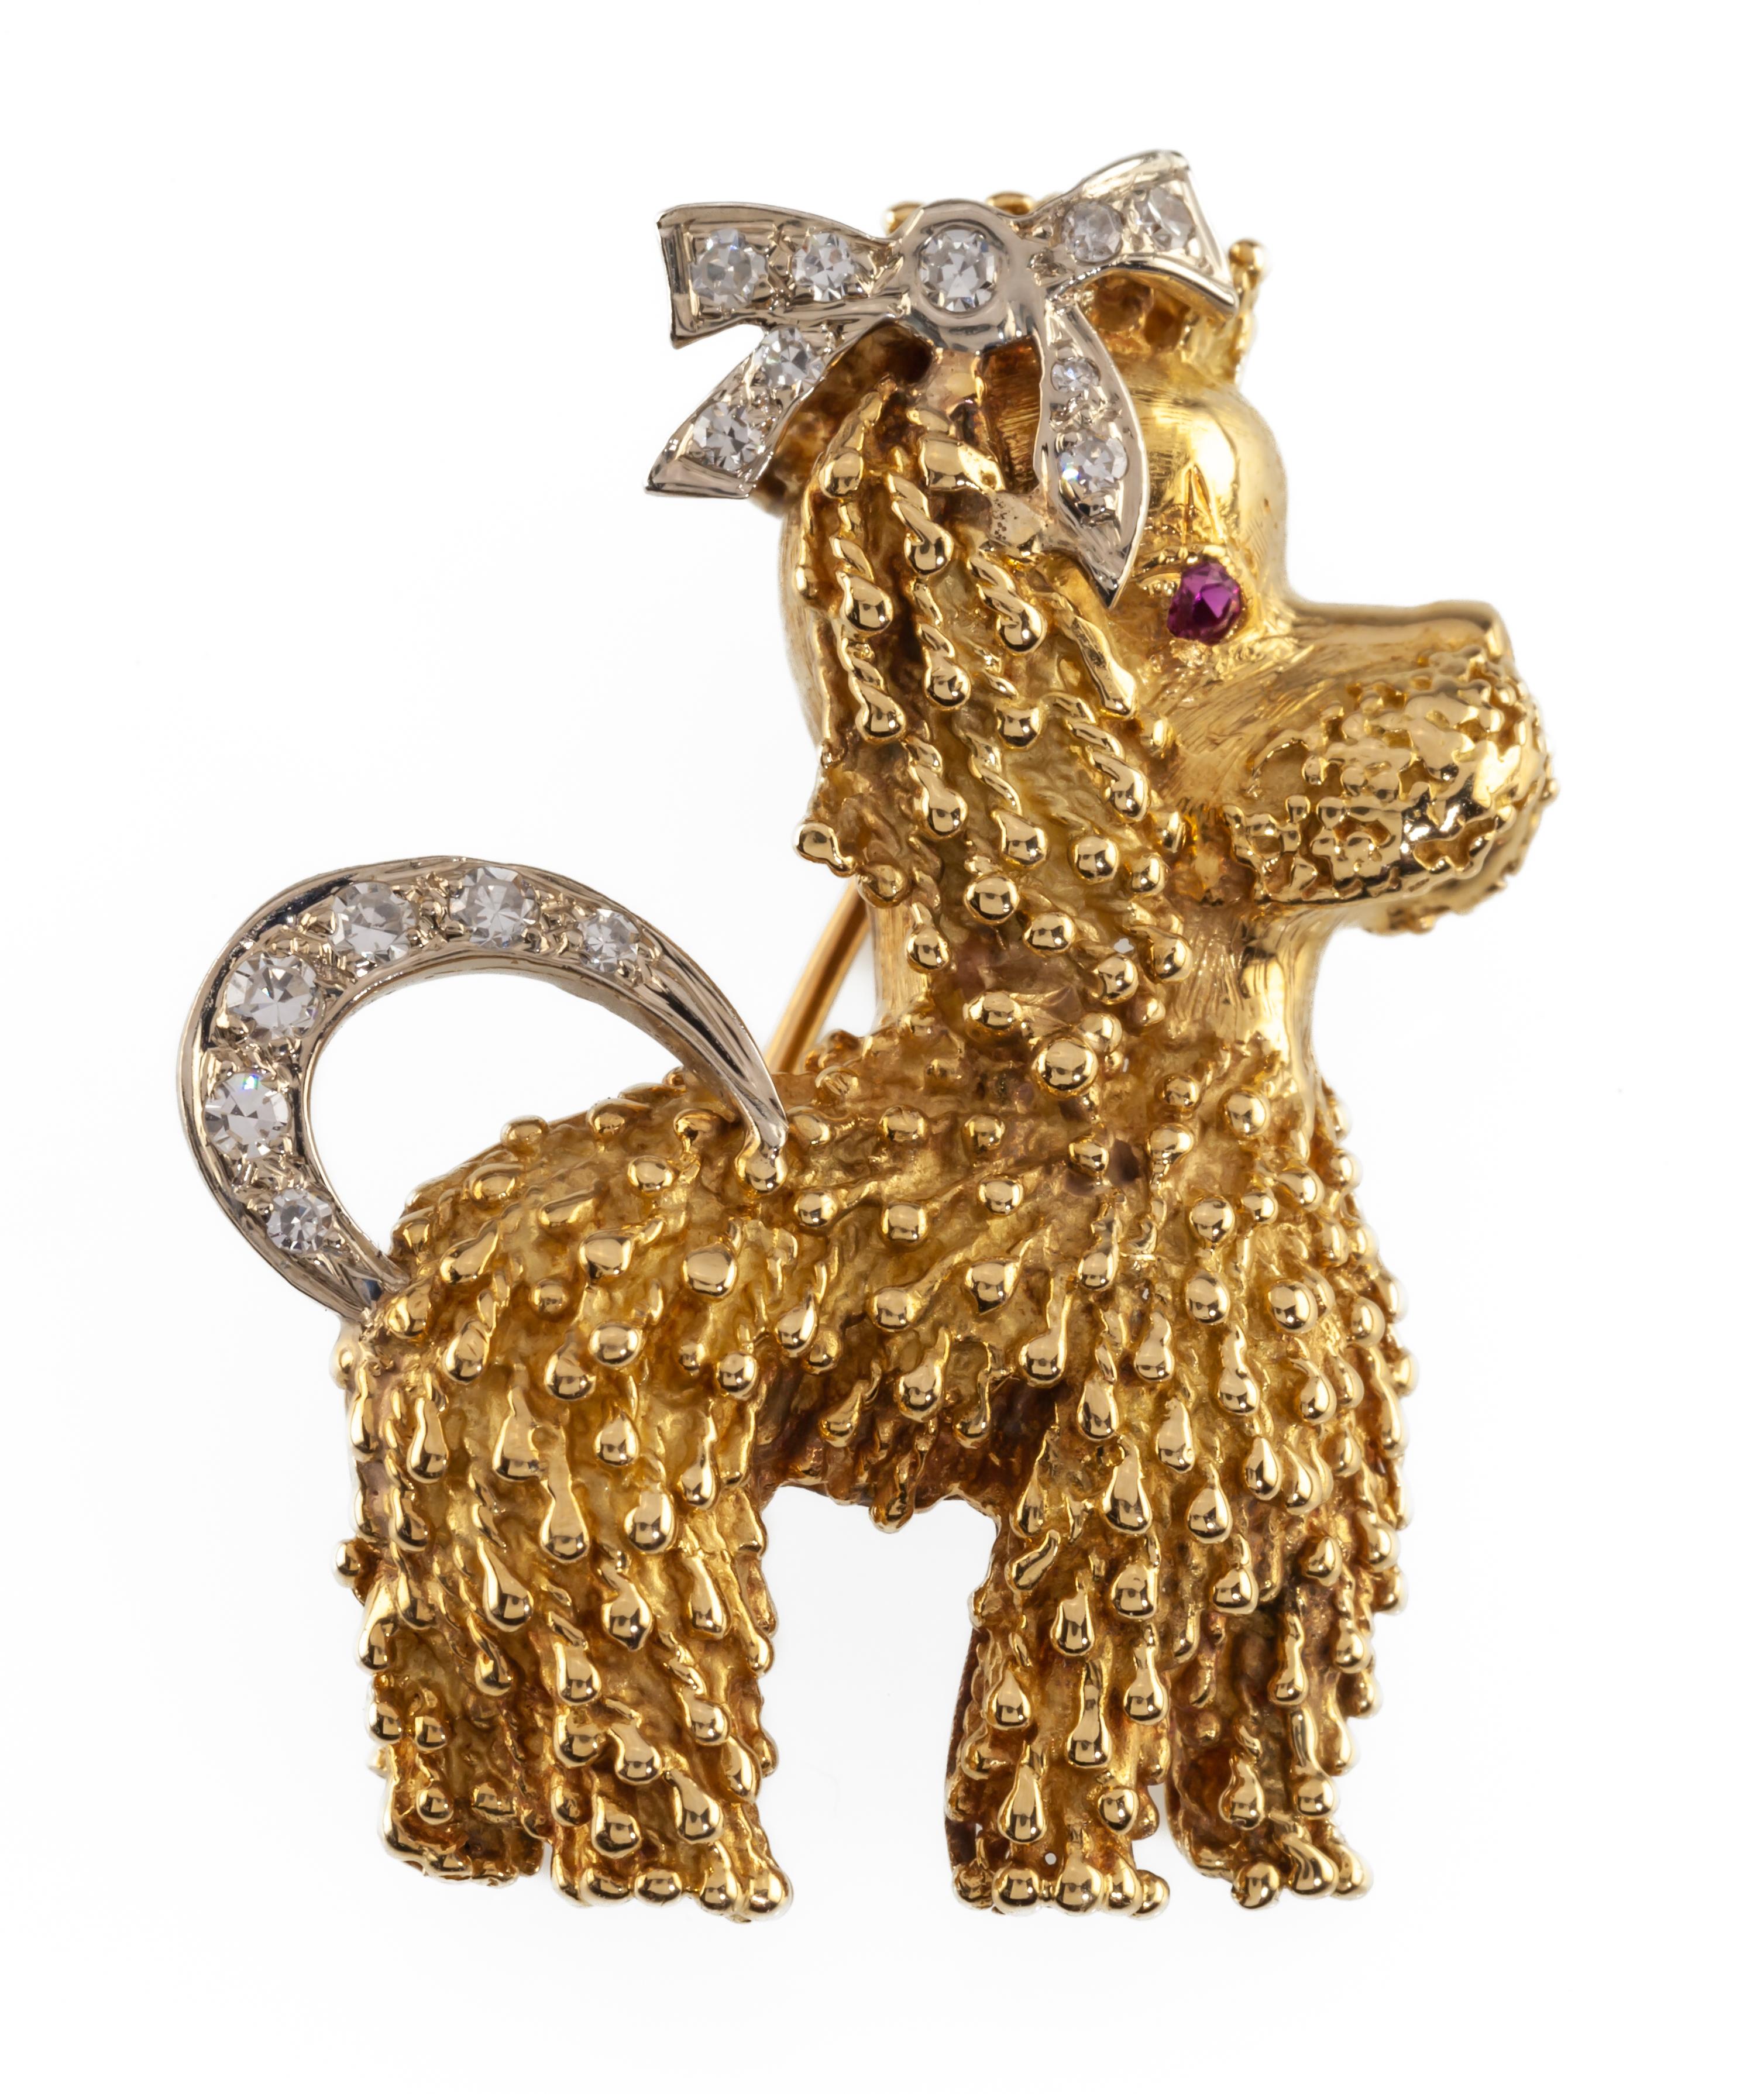 18k Yellow Gold Poodle Brooch Featuring Diamond & Ruby Accents with Certificate For Sale 3